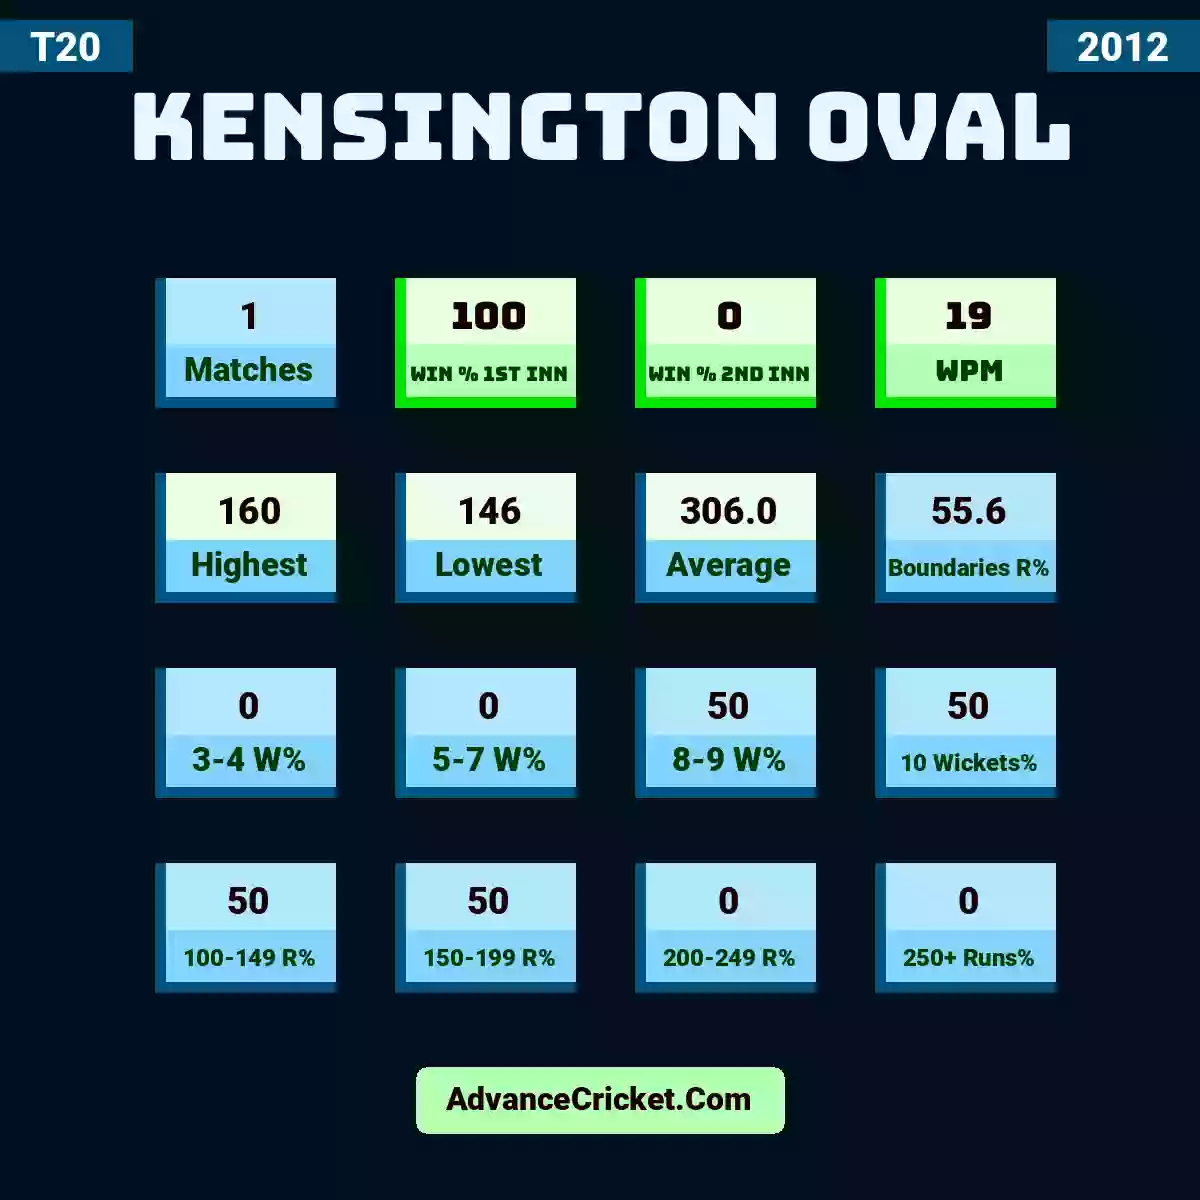 Image showing Kensington Oval with Matches: 1, Win % 1st Inn: 100, Win % 2nd Inn: 0, WPM: 19, Highest: 160, Lowest: 146, Average: 306.0, Boundaries R%: 55.6, 3-4 W%: 0, 5-7 W%: 0, 8-9 W%: 50, 10 Wickets%: 50, 100-149 R%: 50, 150-199 R%: 50, 200-249 R%: 0, 250+ Runs%: 0.